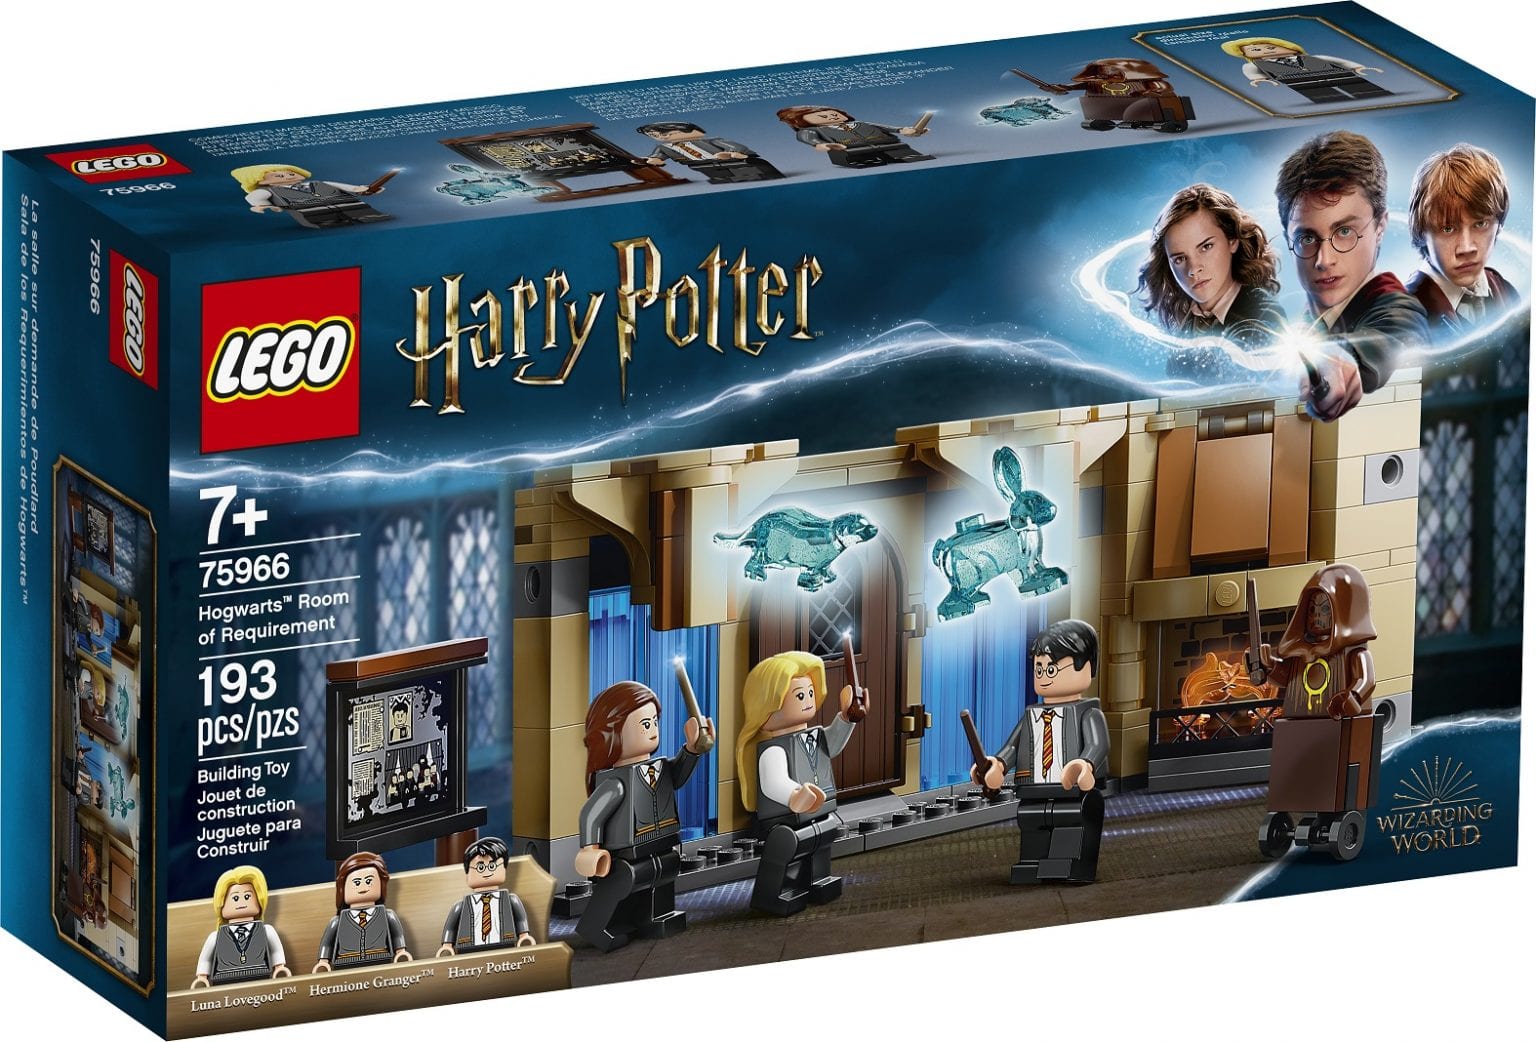 LEGO Reveals 6 New Harry Potter Sets Coming This August - Cinelinx | Movies. Games. Geek Culture.